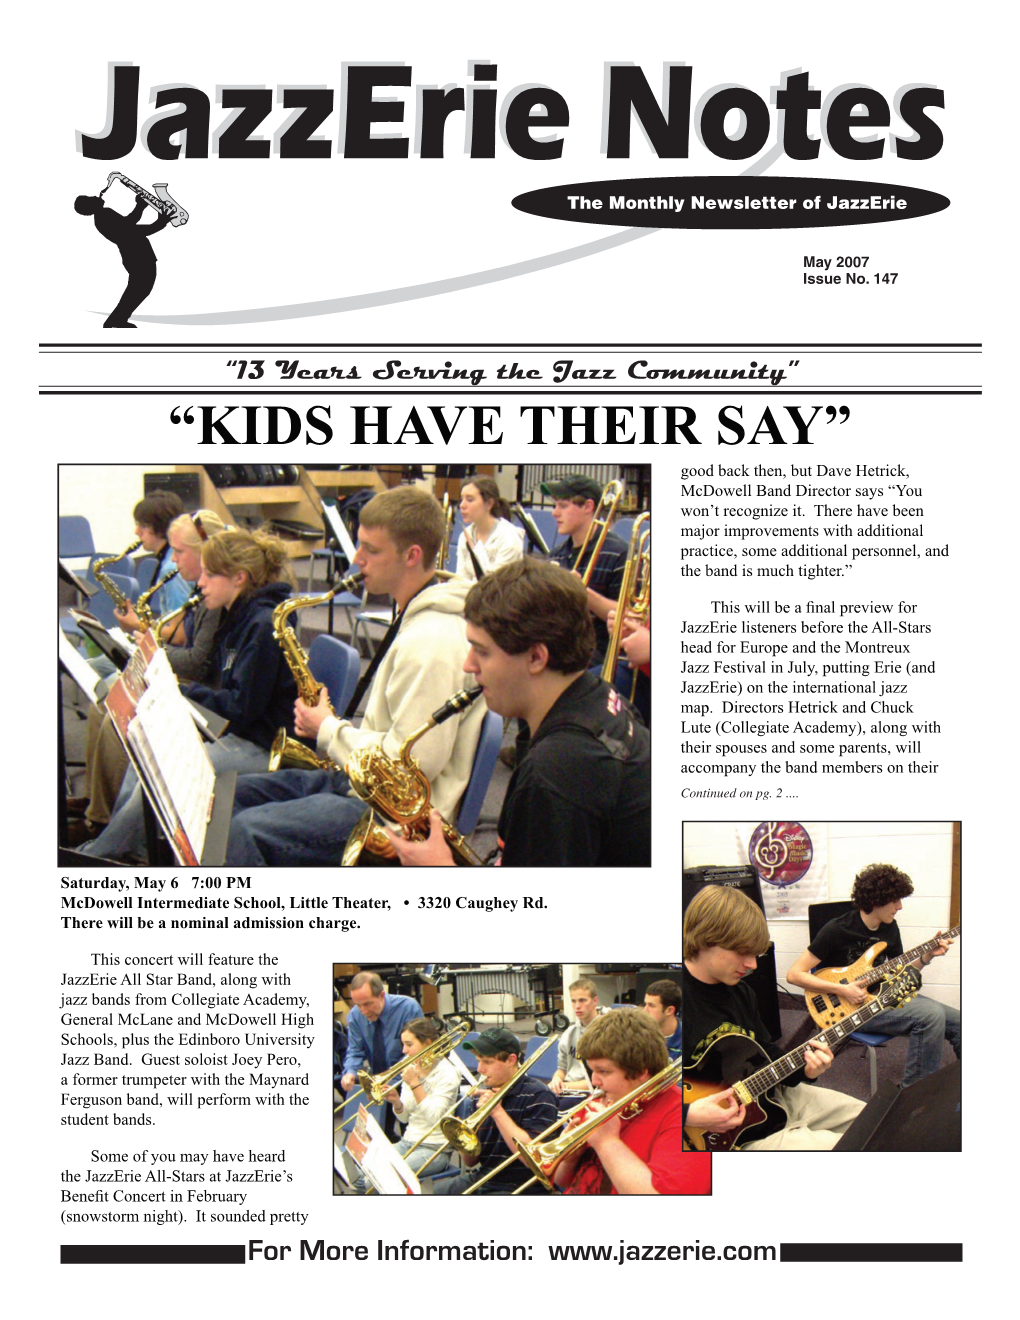 “KIDS HAVE THEIR SAY” Good Back Then, but Dave Hetrick, Mcdowell Band Director Says “You Won’T Recognize It